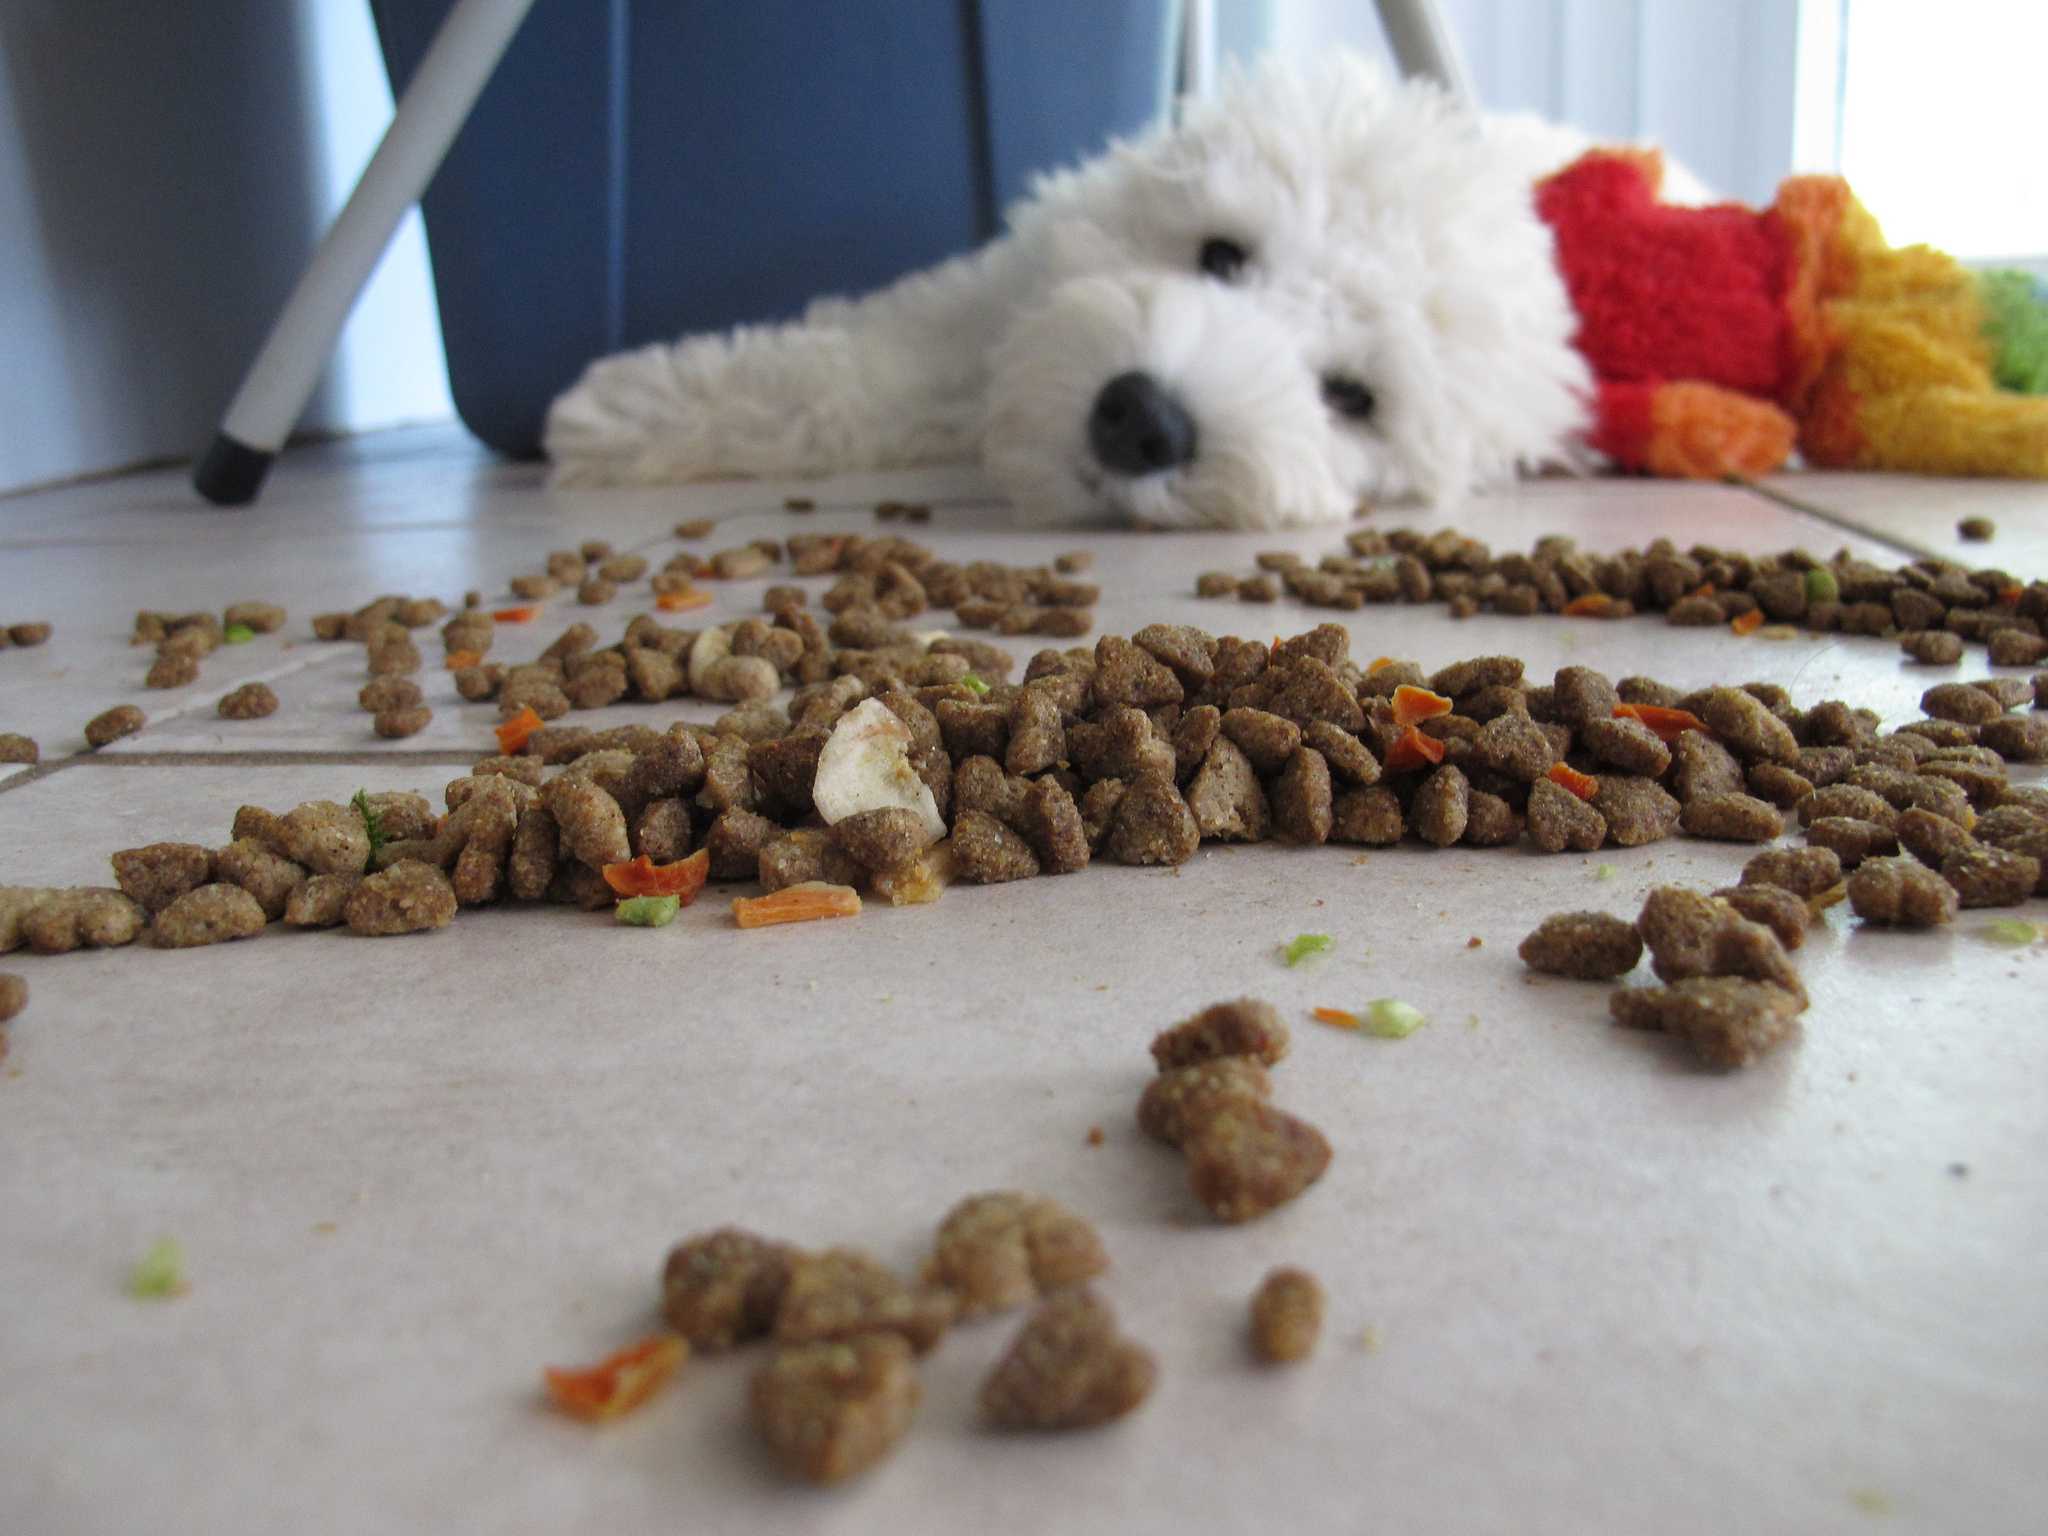 Dog laying down behind spilled food